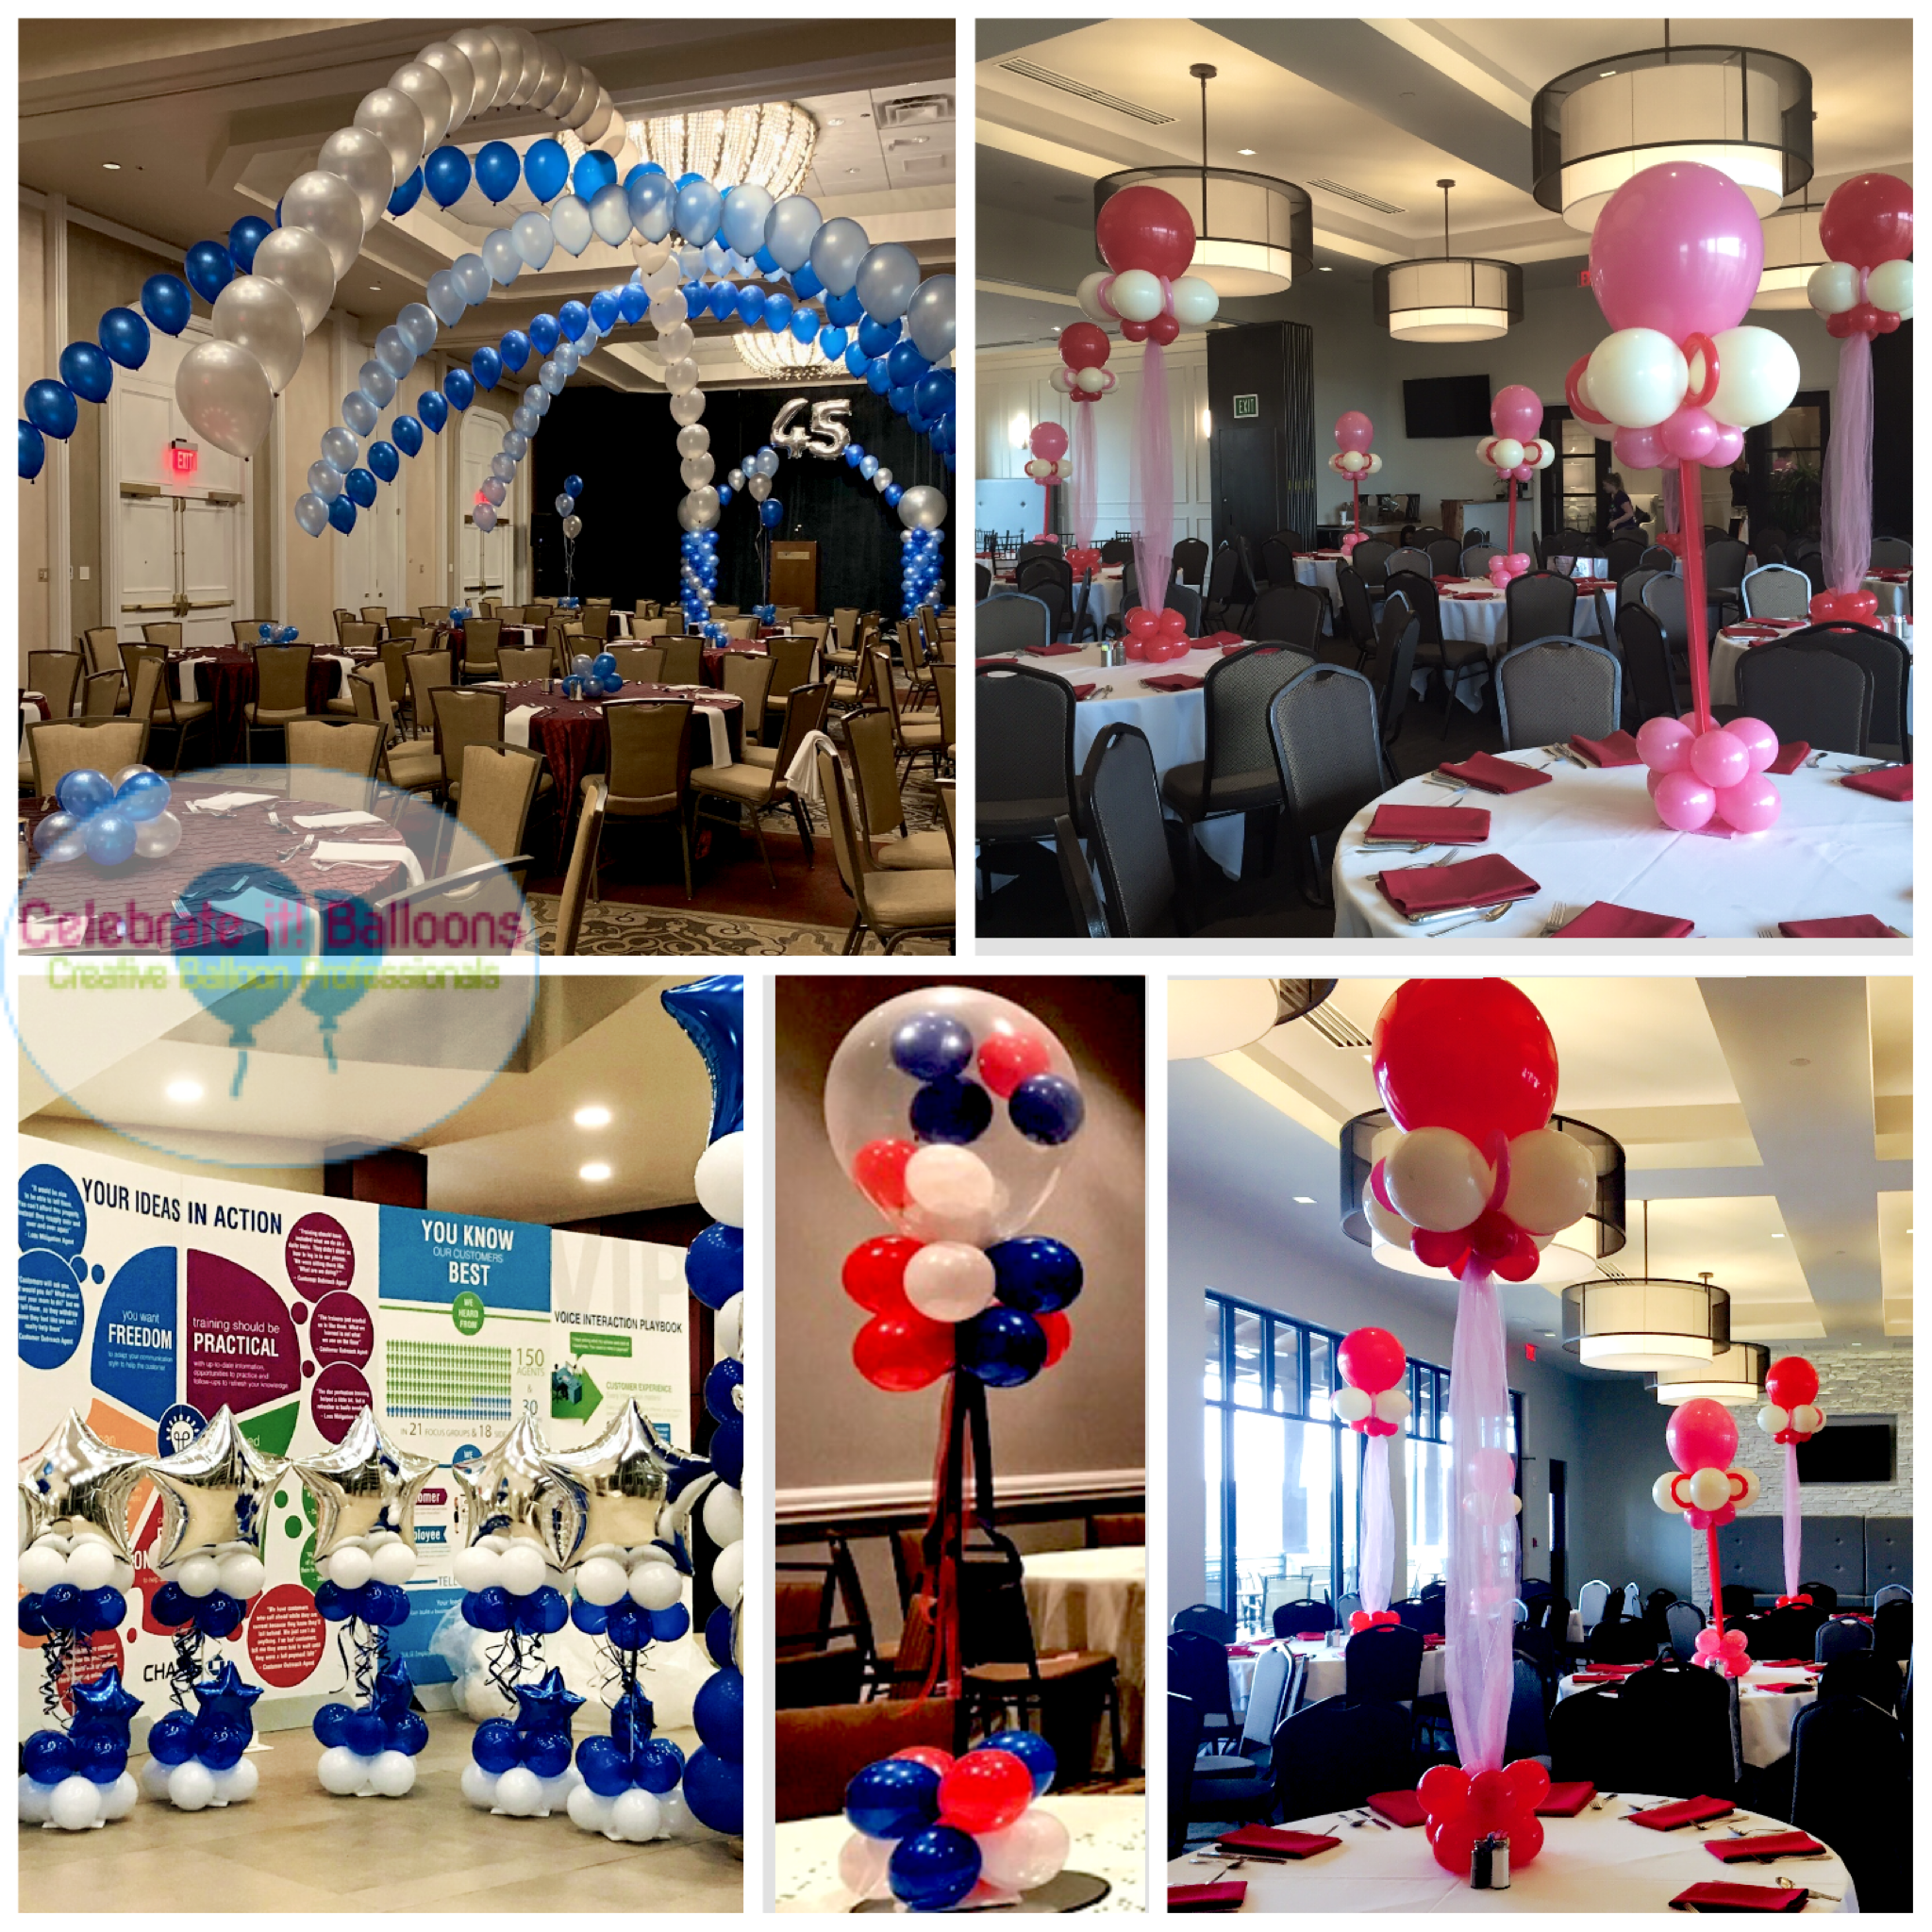 String of pearls arch centerpieces with balloon base, stuffed balloon centerpiece, oversized topper